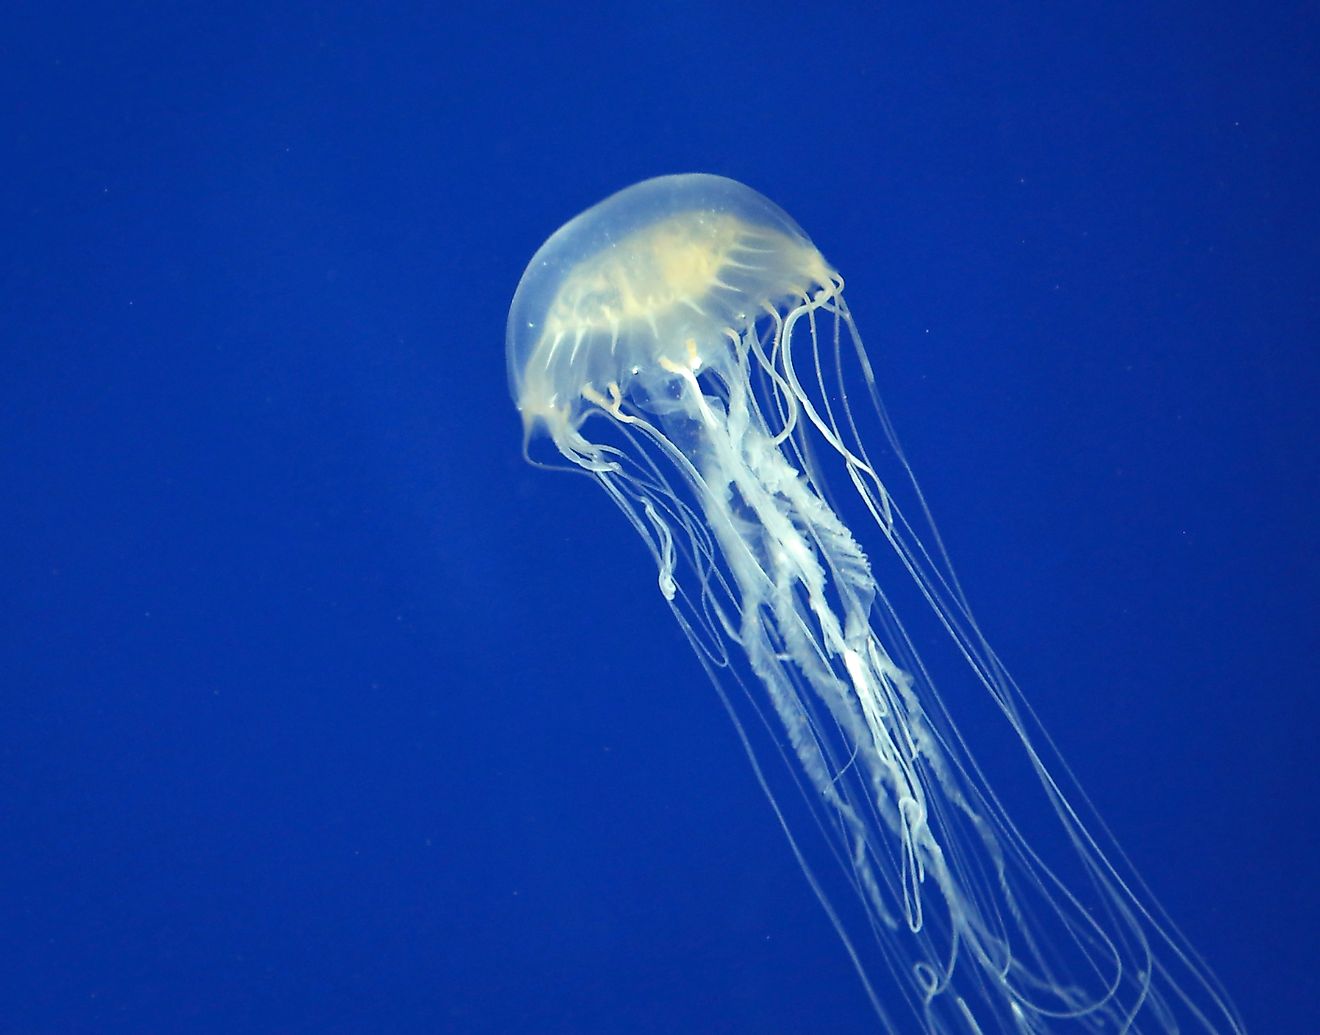 Due to the potent venom in their stinging nematocysts, Chironex fleckeri, commonly known as Australian Box Jellyfishes, are some of the deadliest animals in the world.